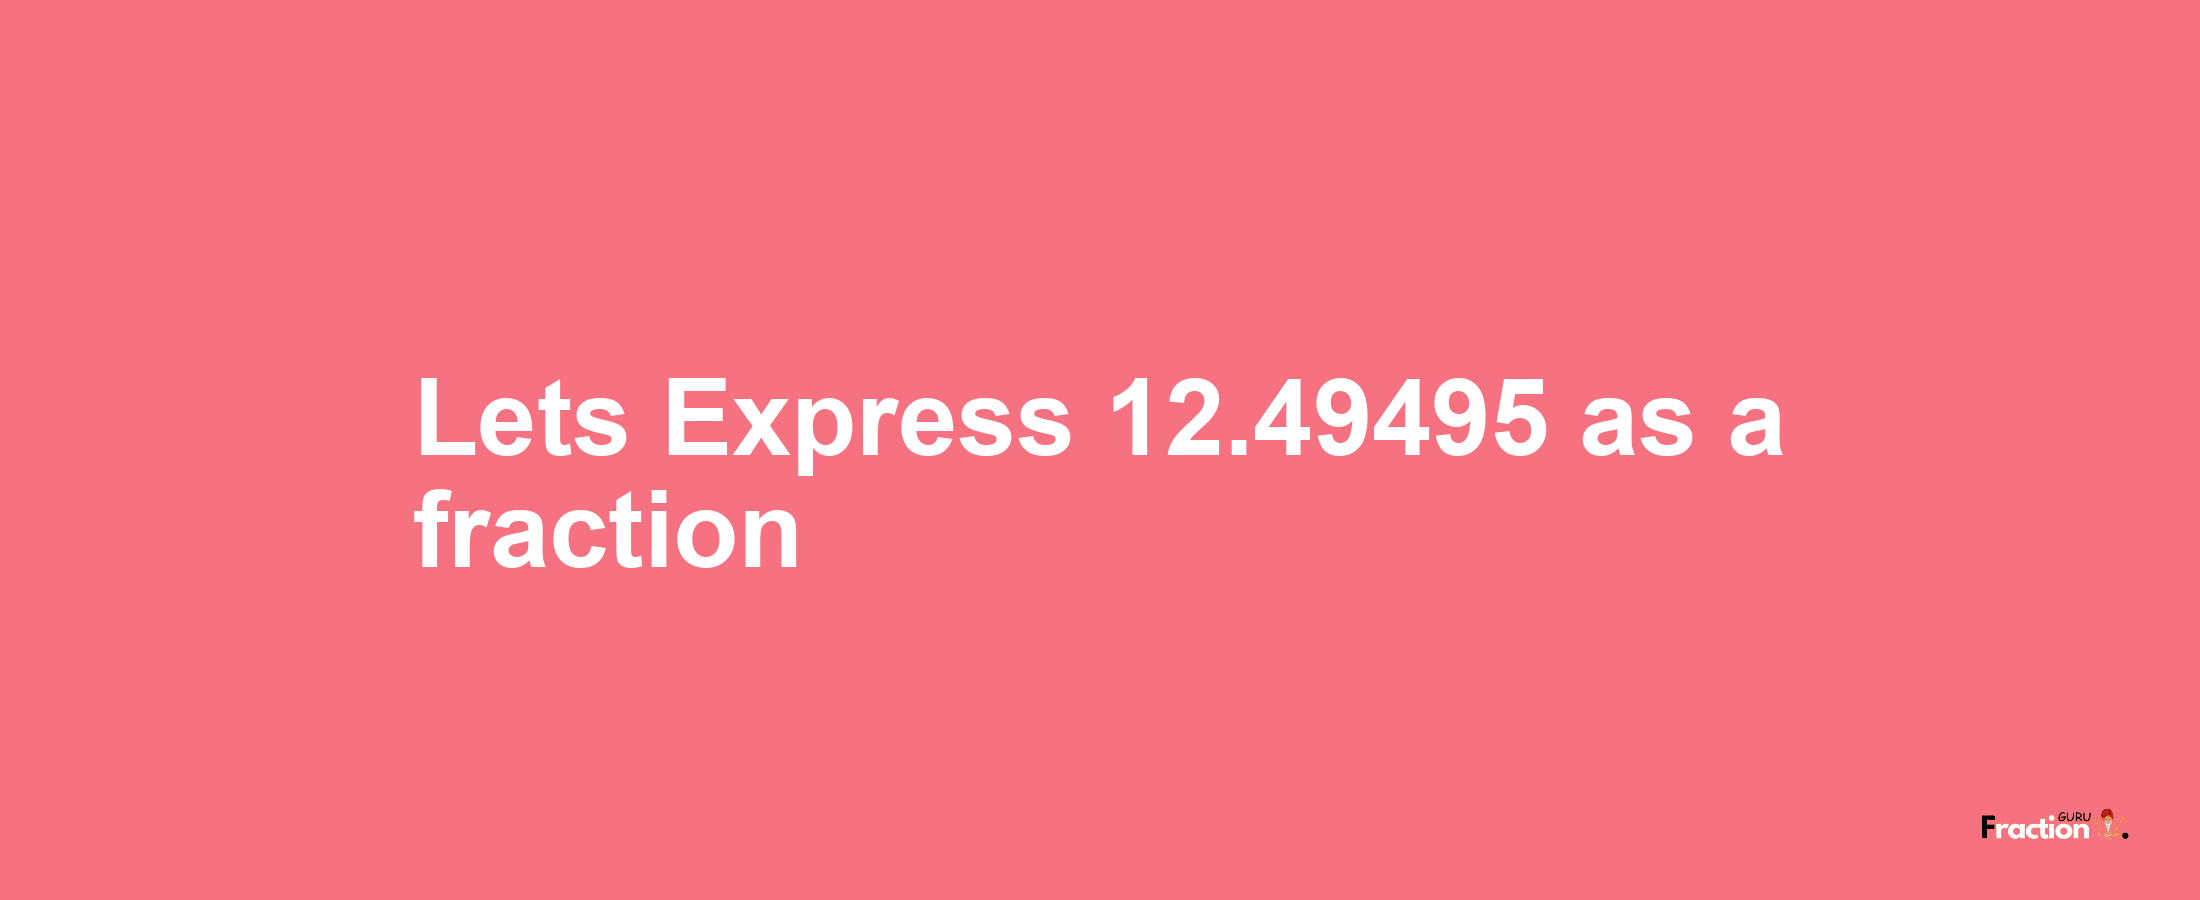 Lets Express 12.49495 as afraction